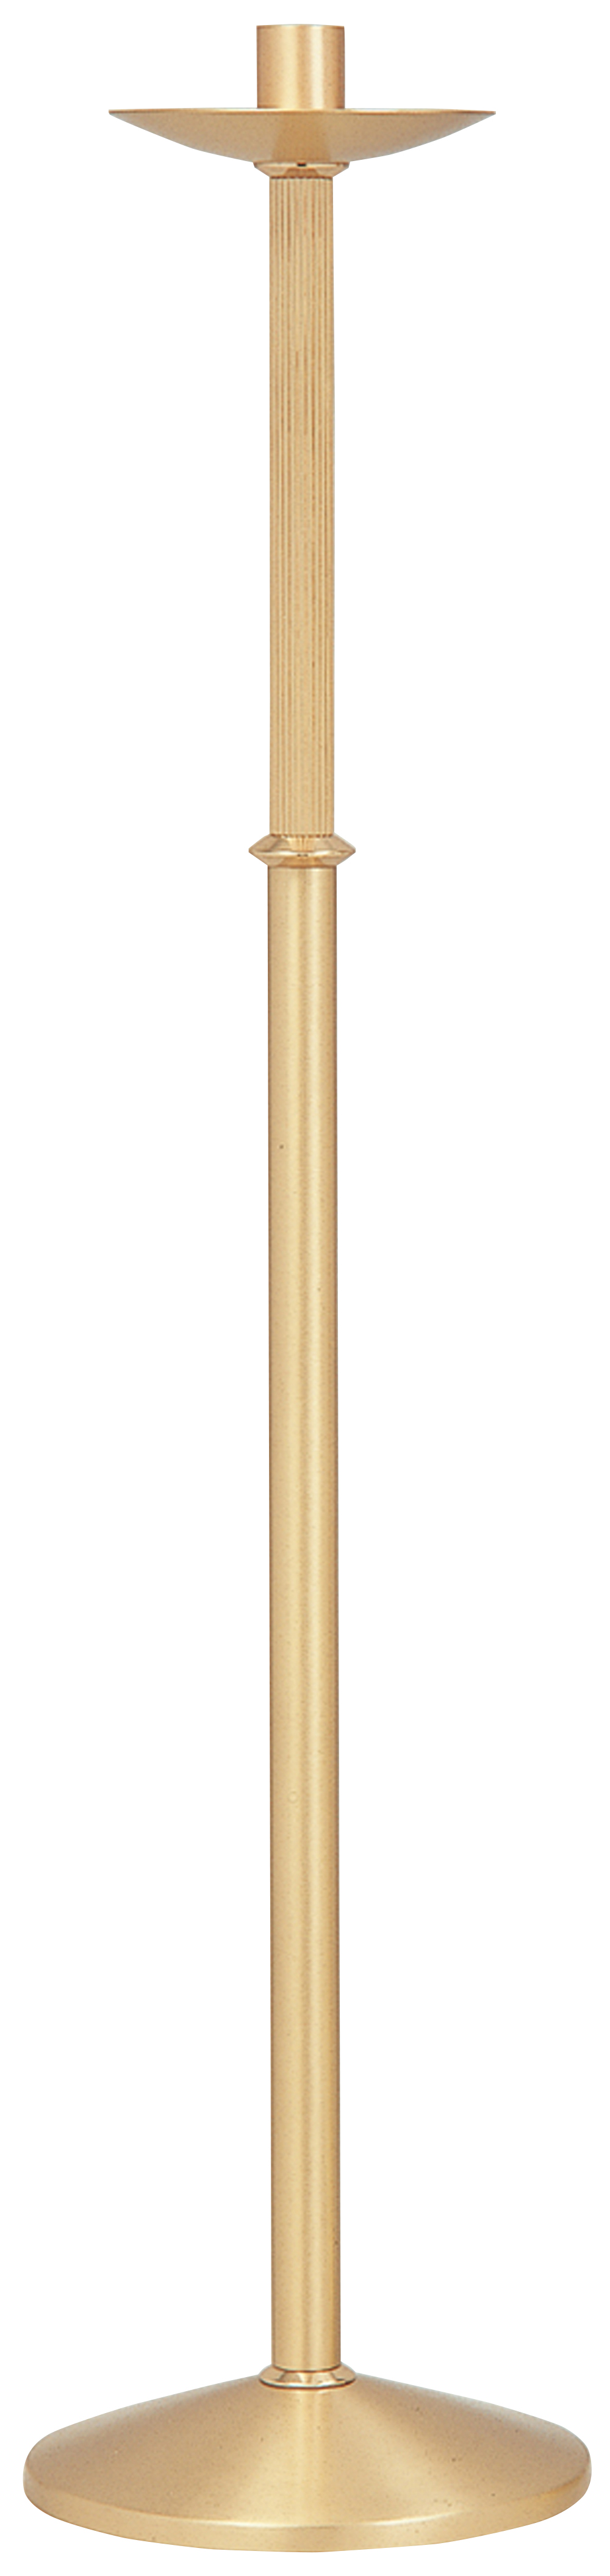 Processional Torch 44 inch 1 1/2 inch socket